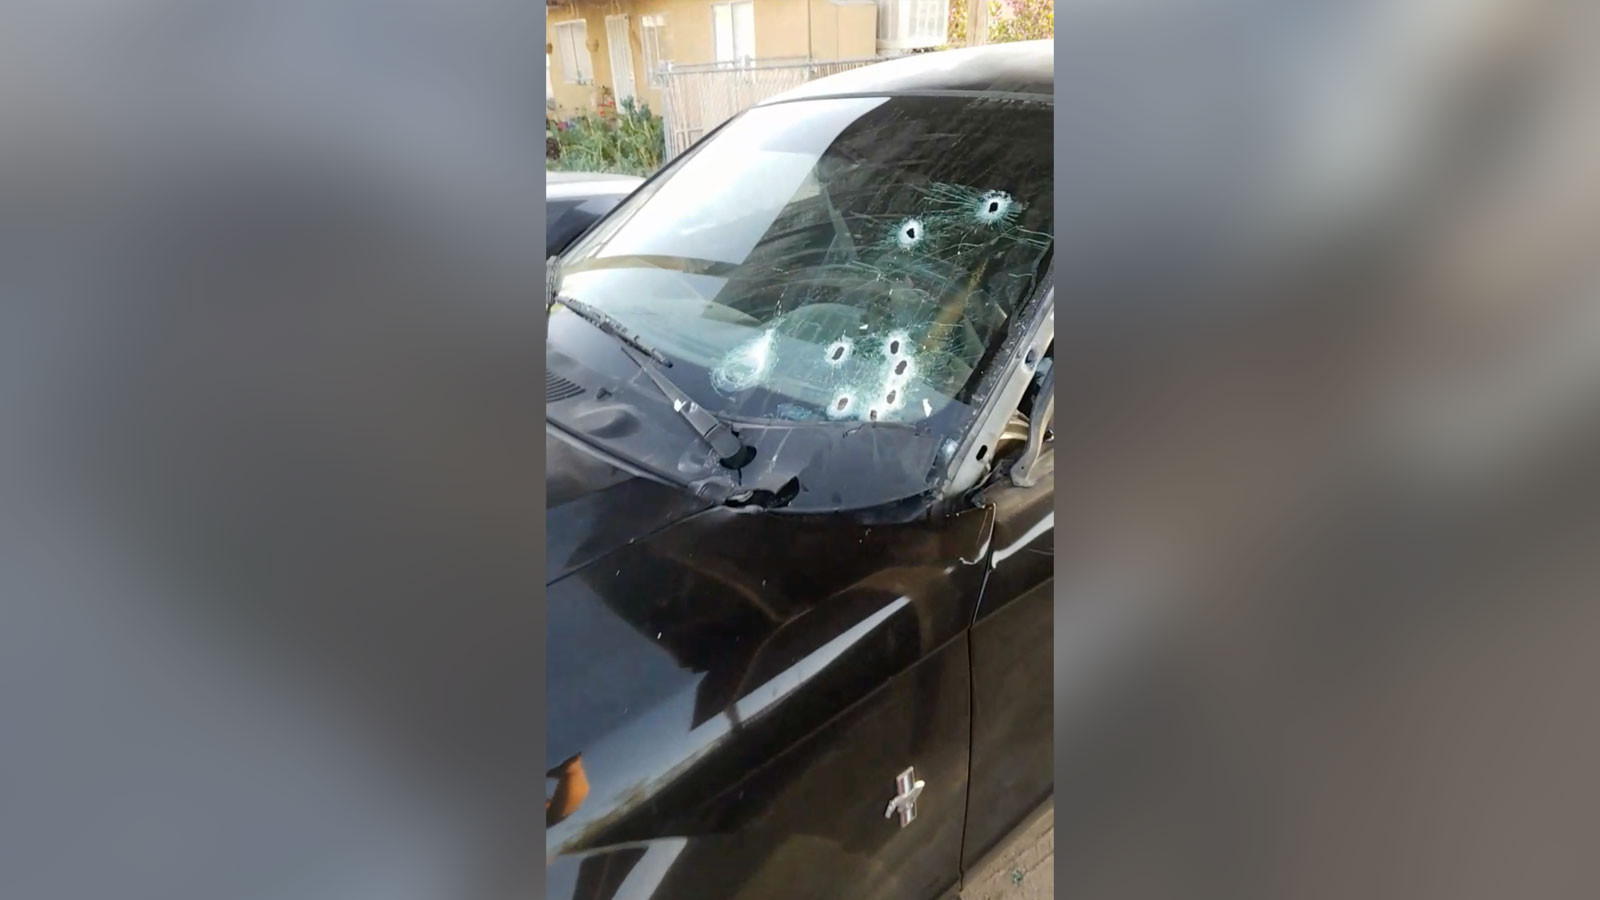 PHOTO: Diante Yarber, 26, was driving this Ford Mustang when Barstow police officers shot into the vehicle and killed him.